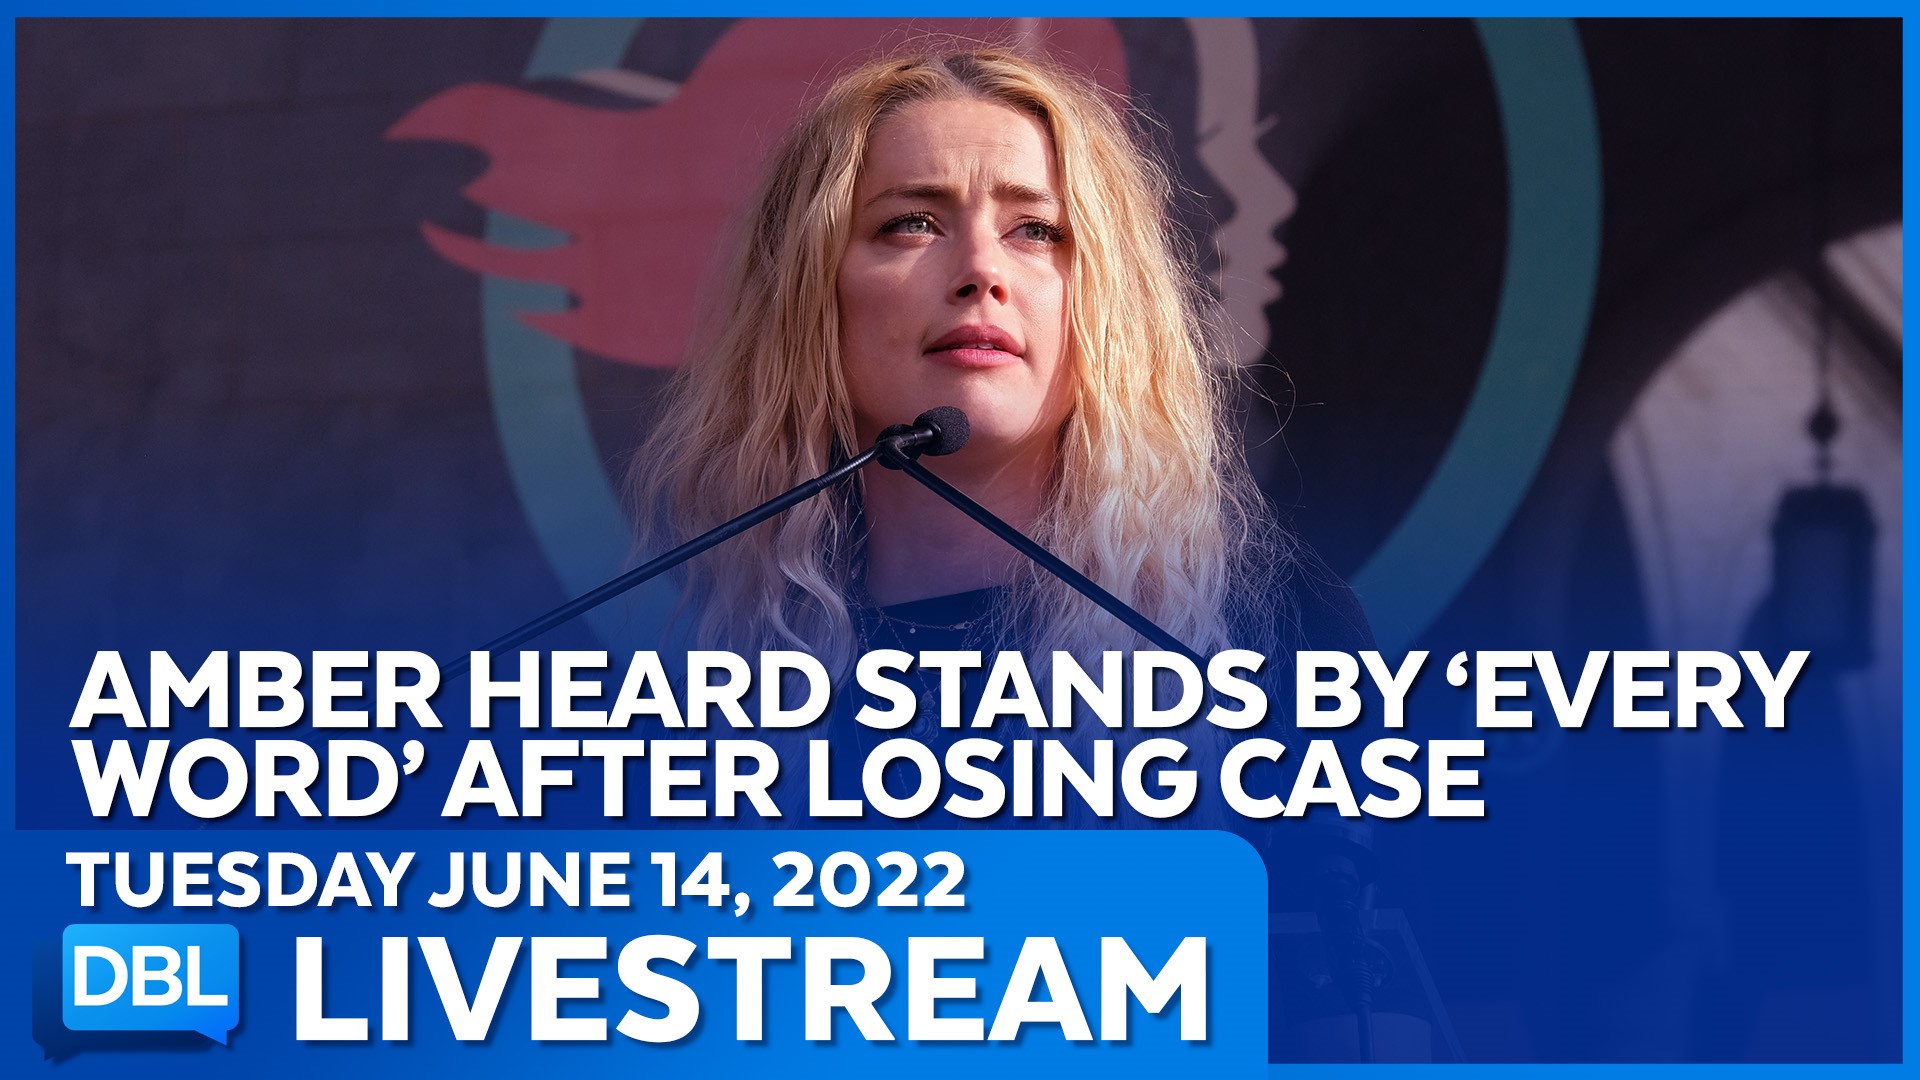 The biggest bombshells from the second January 6 committee hearing; Amber Heard stands by her testimony in new interview.